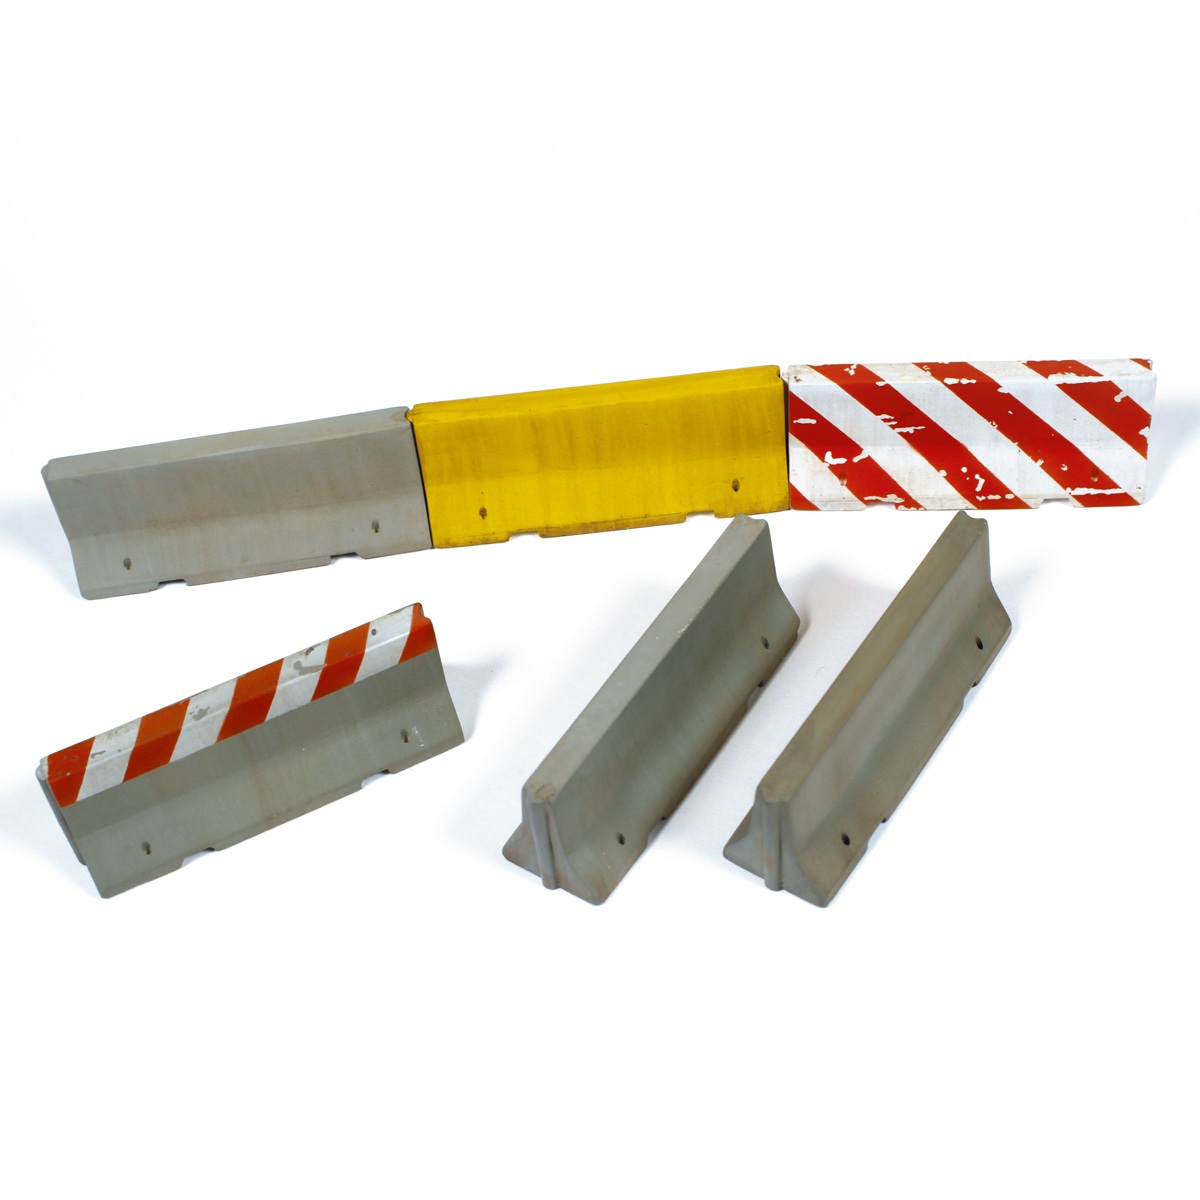 Concrete Barriers (Type 1)